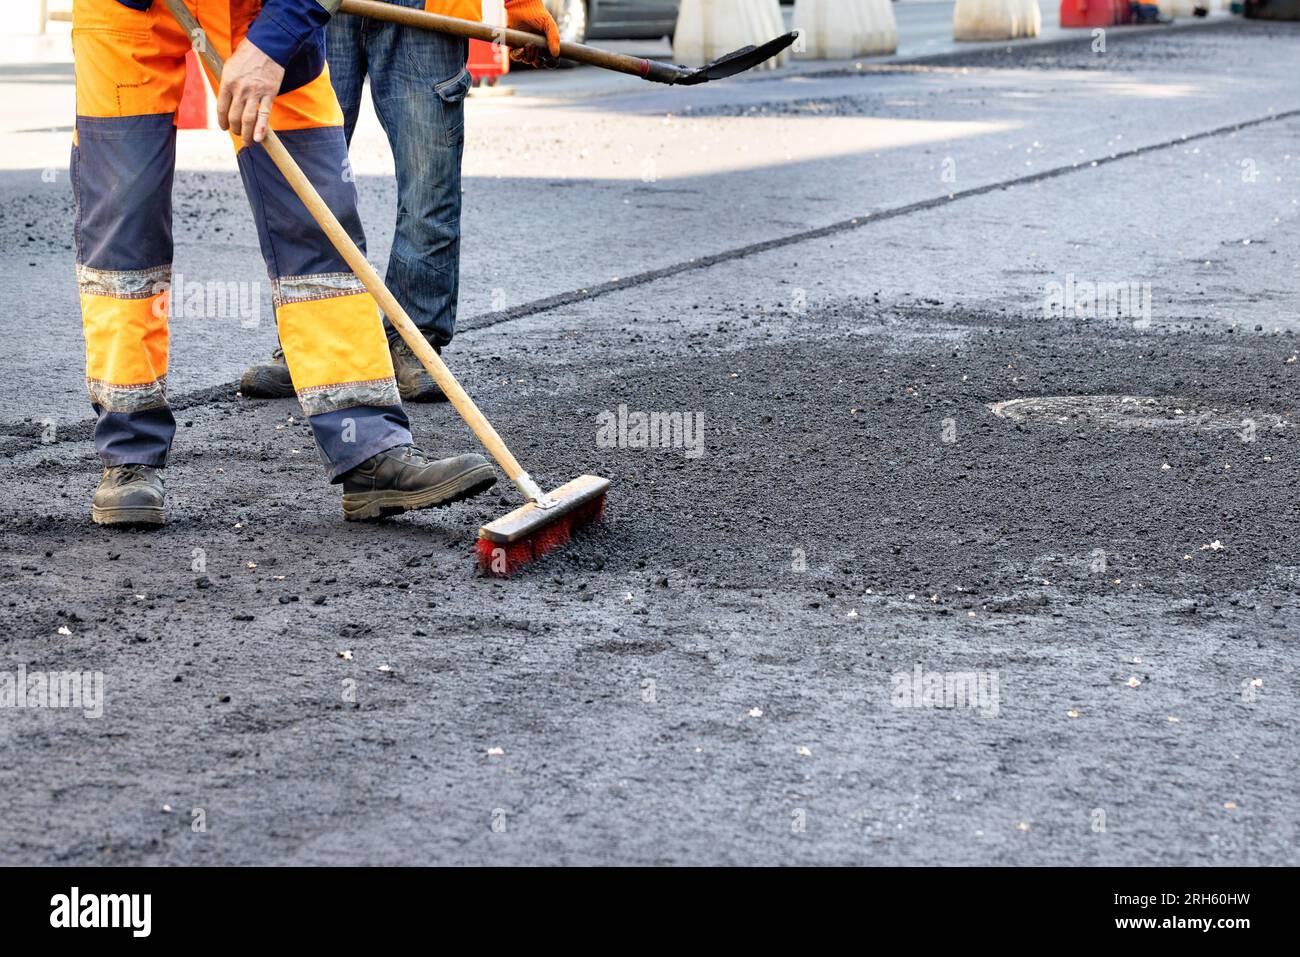 Road workers remove excess rubble with a brush and shovel on the new asphalt surface around the sewer manholes. Copy space. Stock Photo